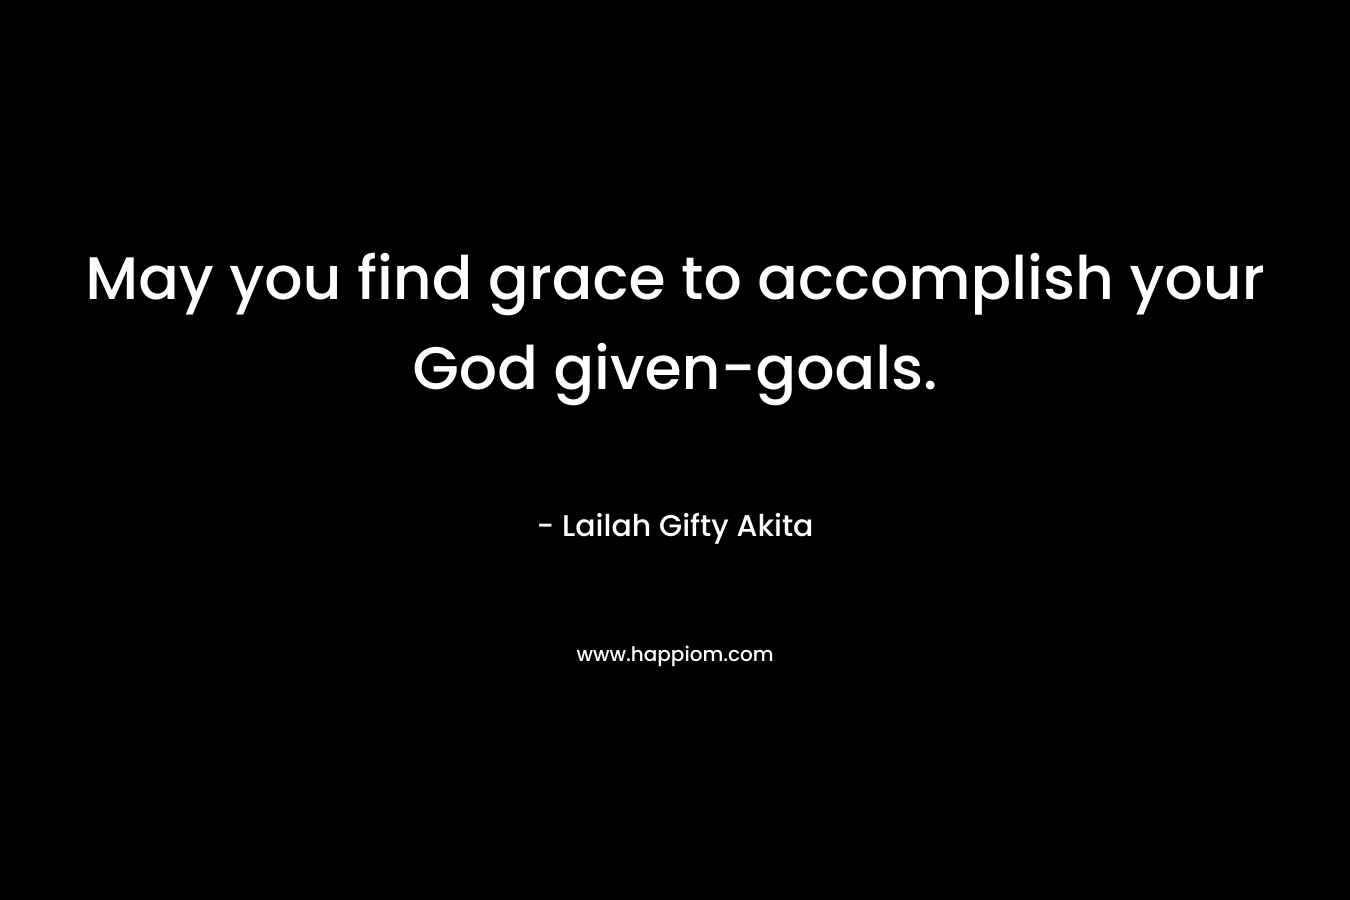 May you find grace to accomplish your God given-goals.